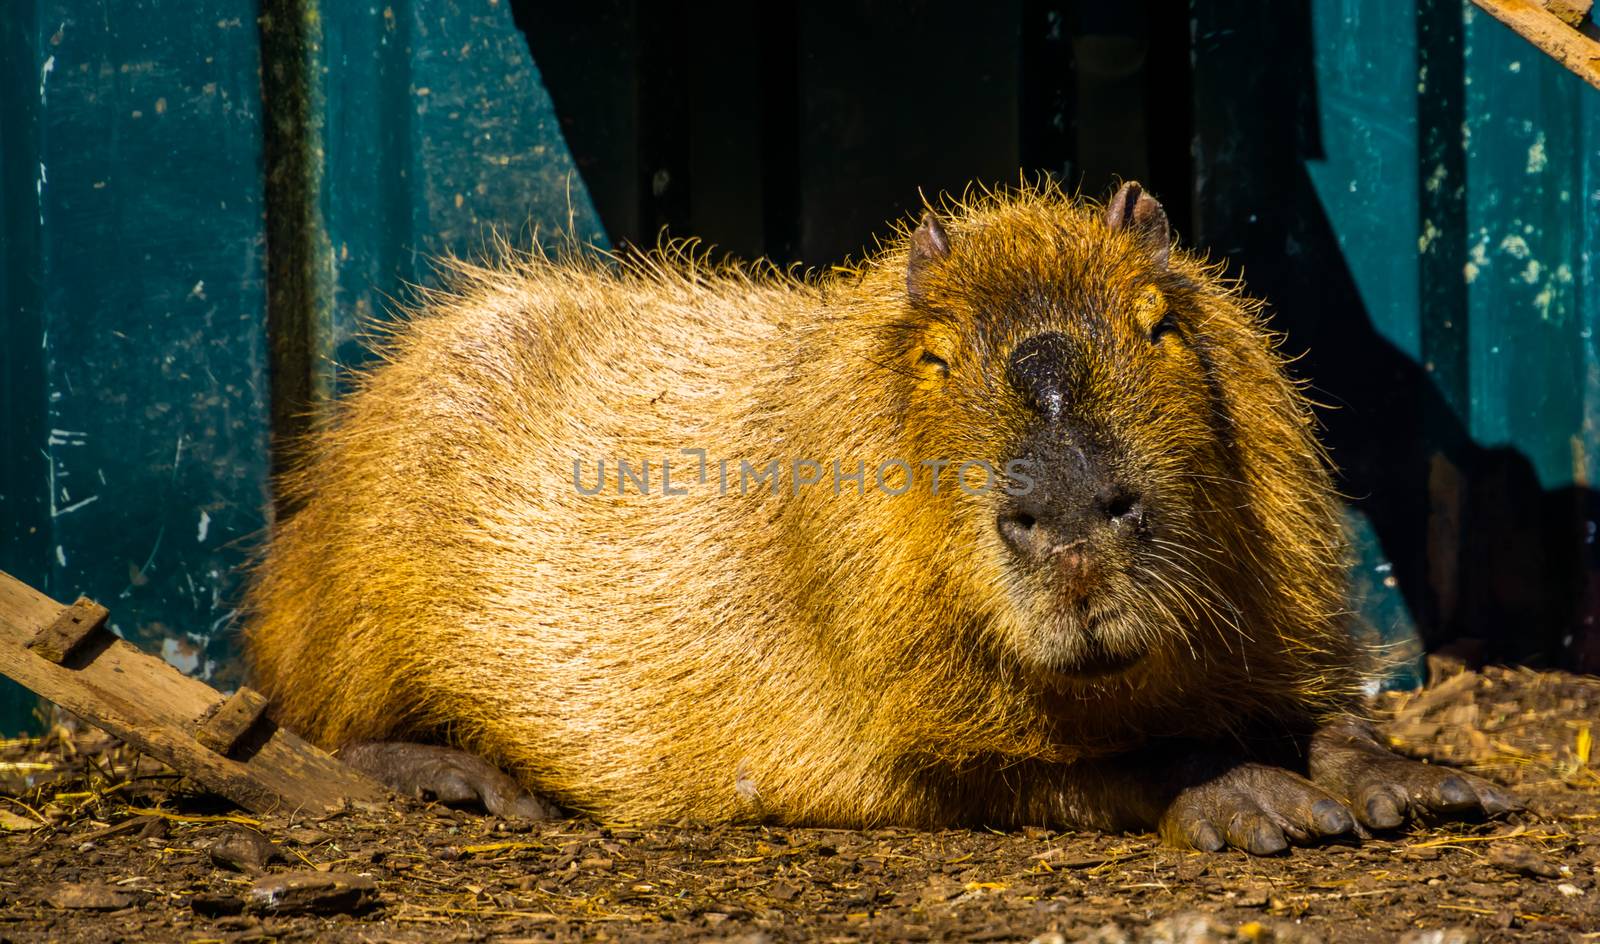 closeup portrait of a capybara, worlds largest rodent specie, tropical cavy from South America by charlottebleijenberg